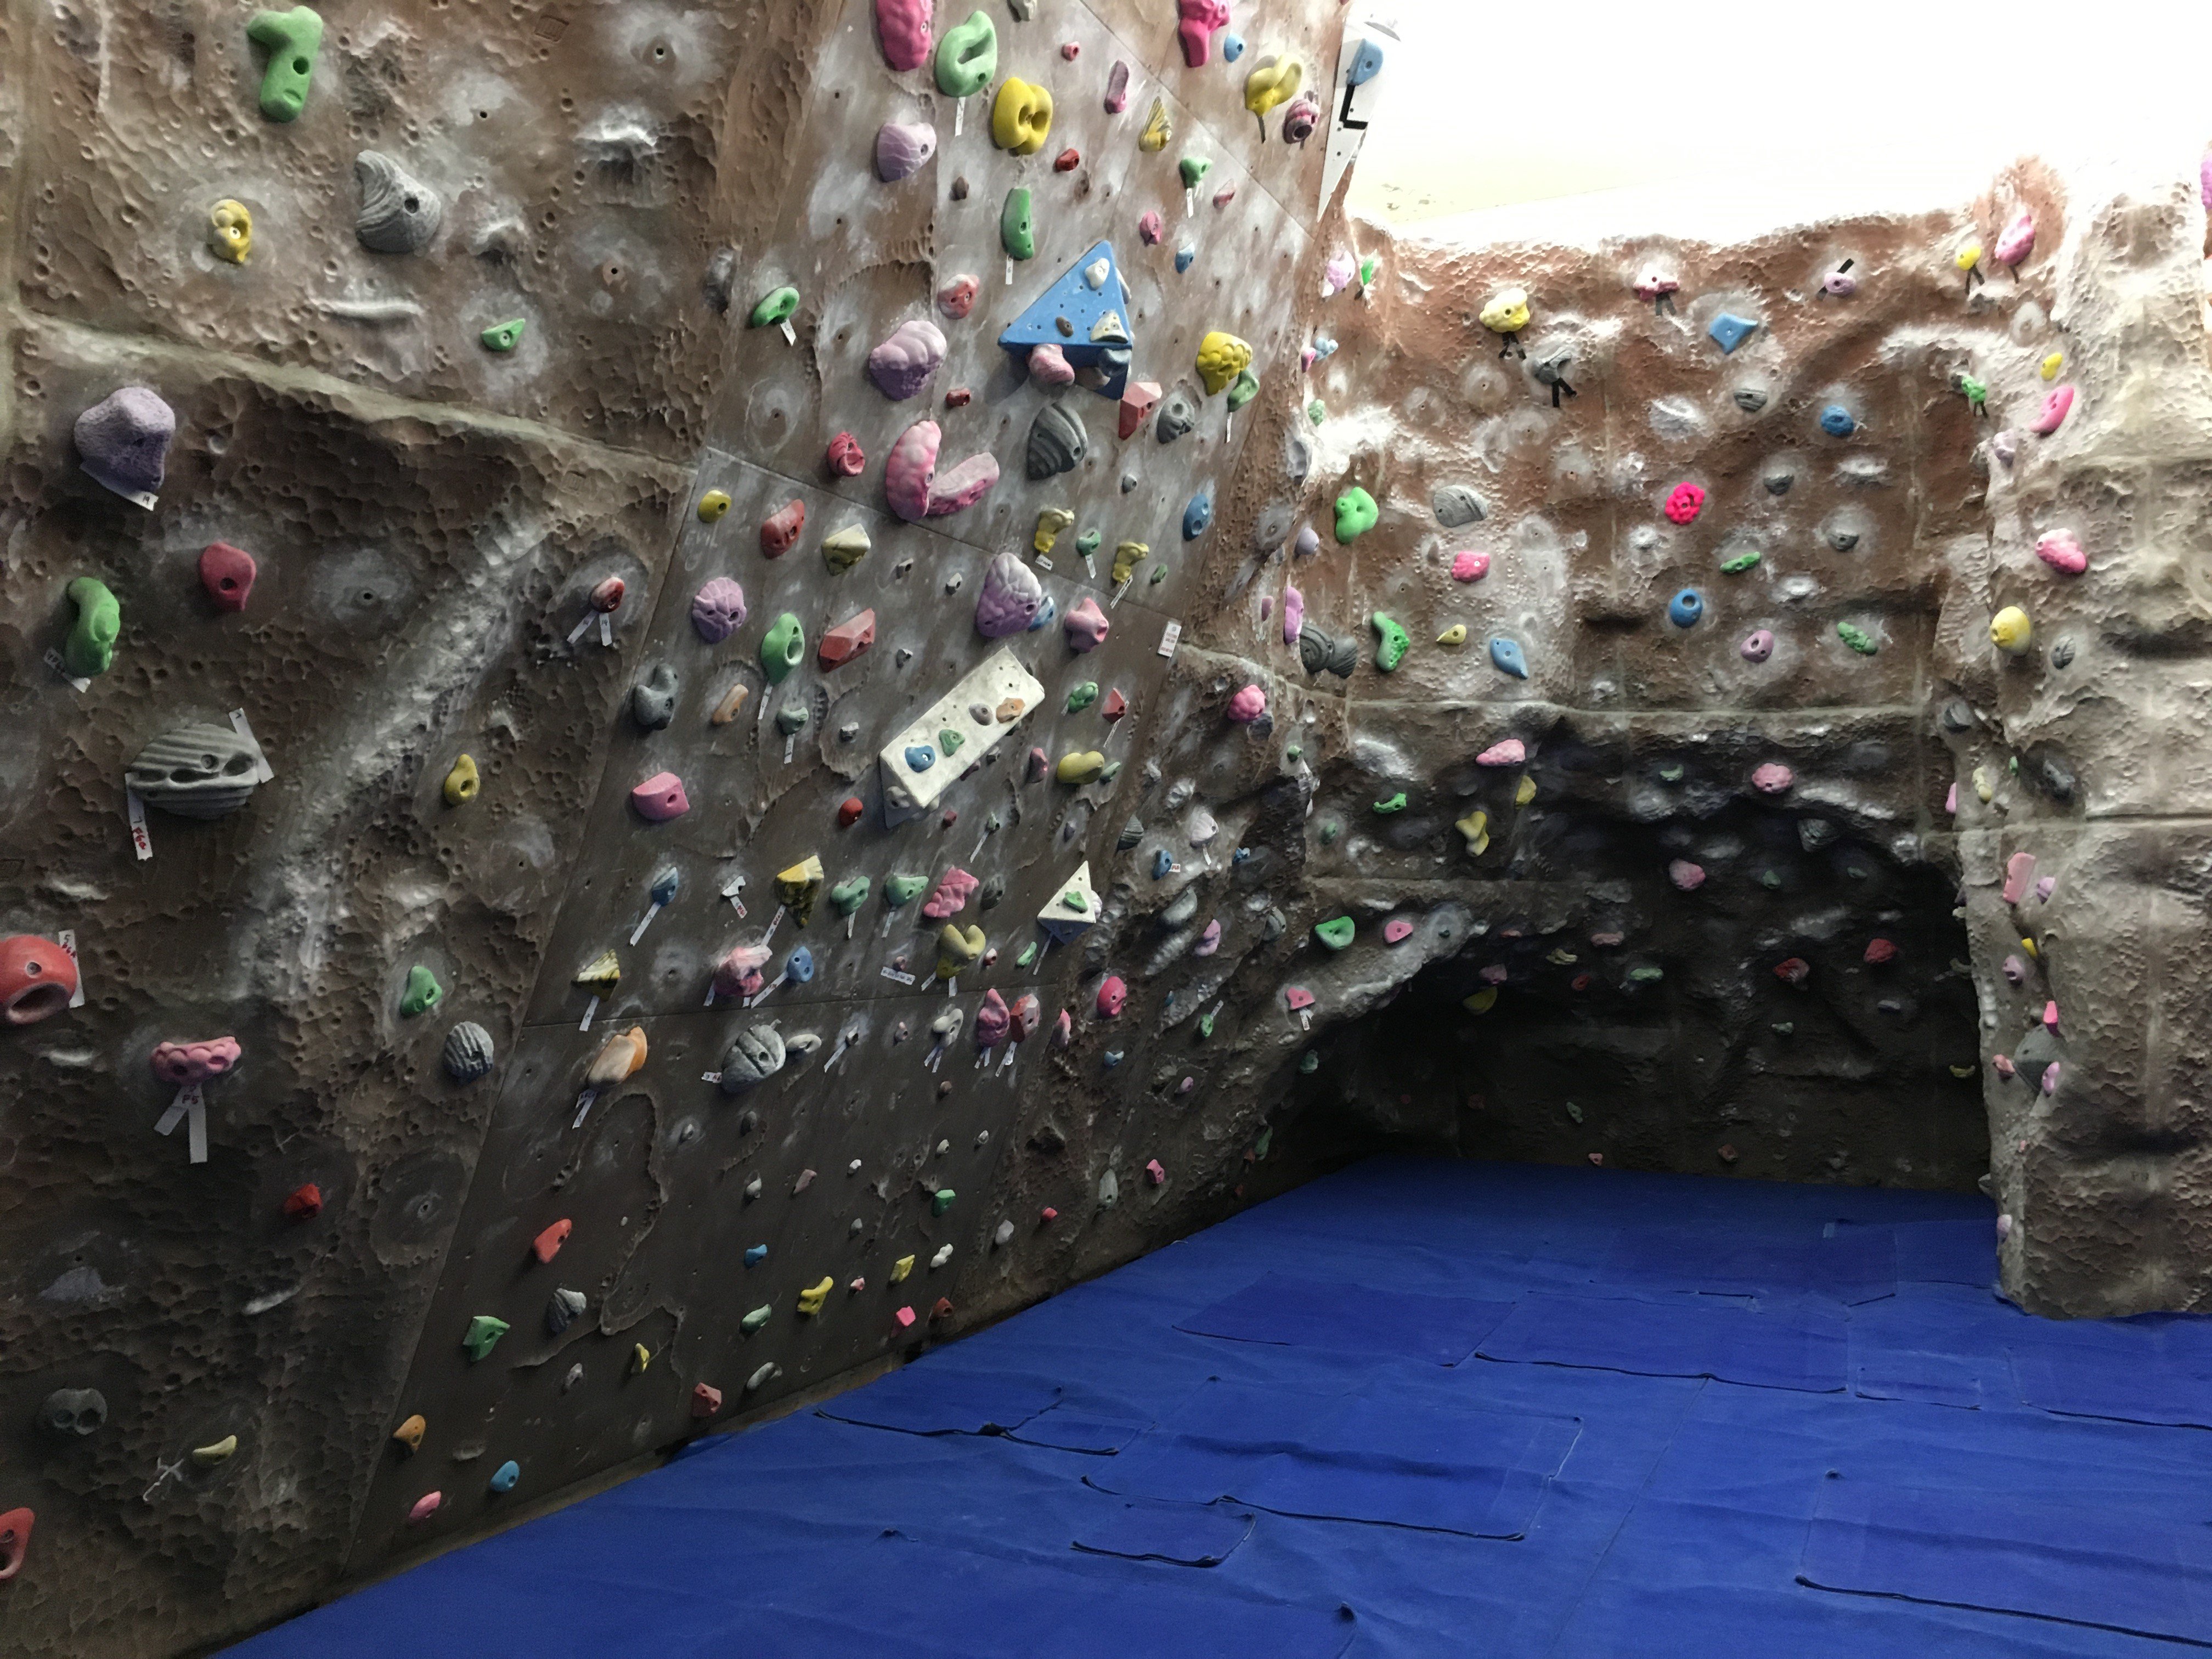 AberUni Sport on Twitter: "78 new bouldering problems completed in Box Rox over the weekend. Big thanks to AMC members who worked hard with @abersport setting routes. https://t.co/yD1AjbH2N9" / Twitter